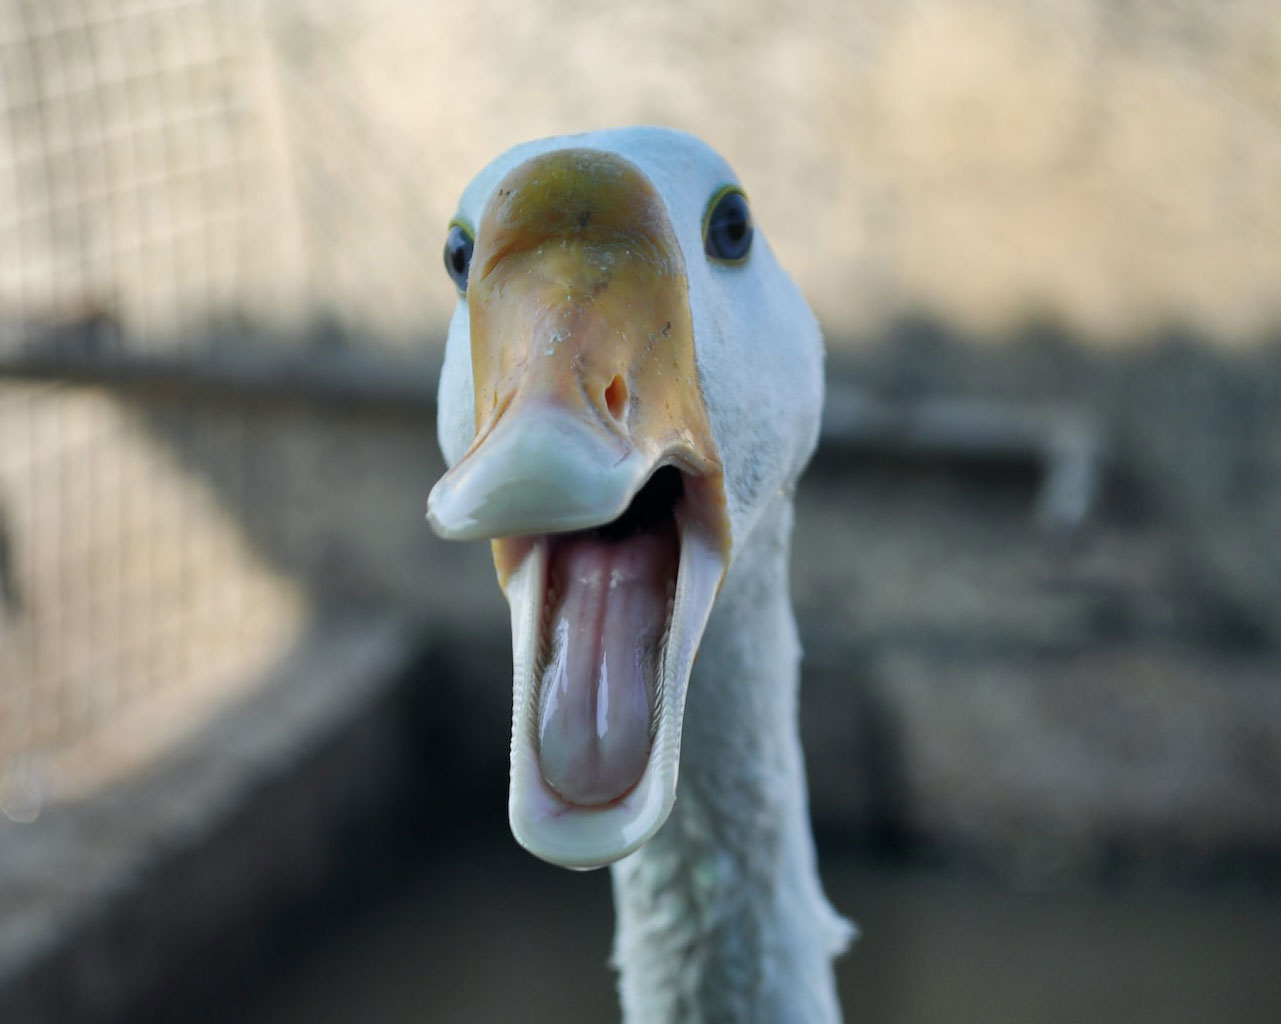 A goose looking directly into the camera, making a funny face with its beak open.